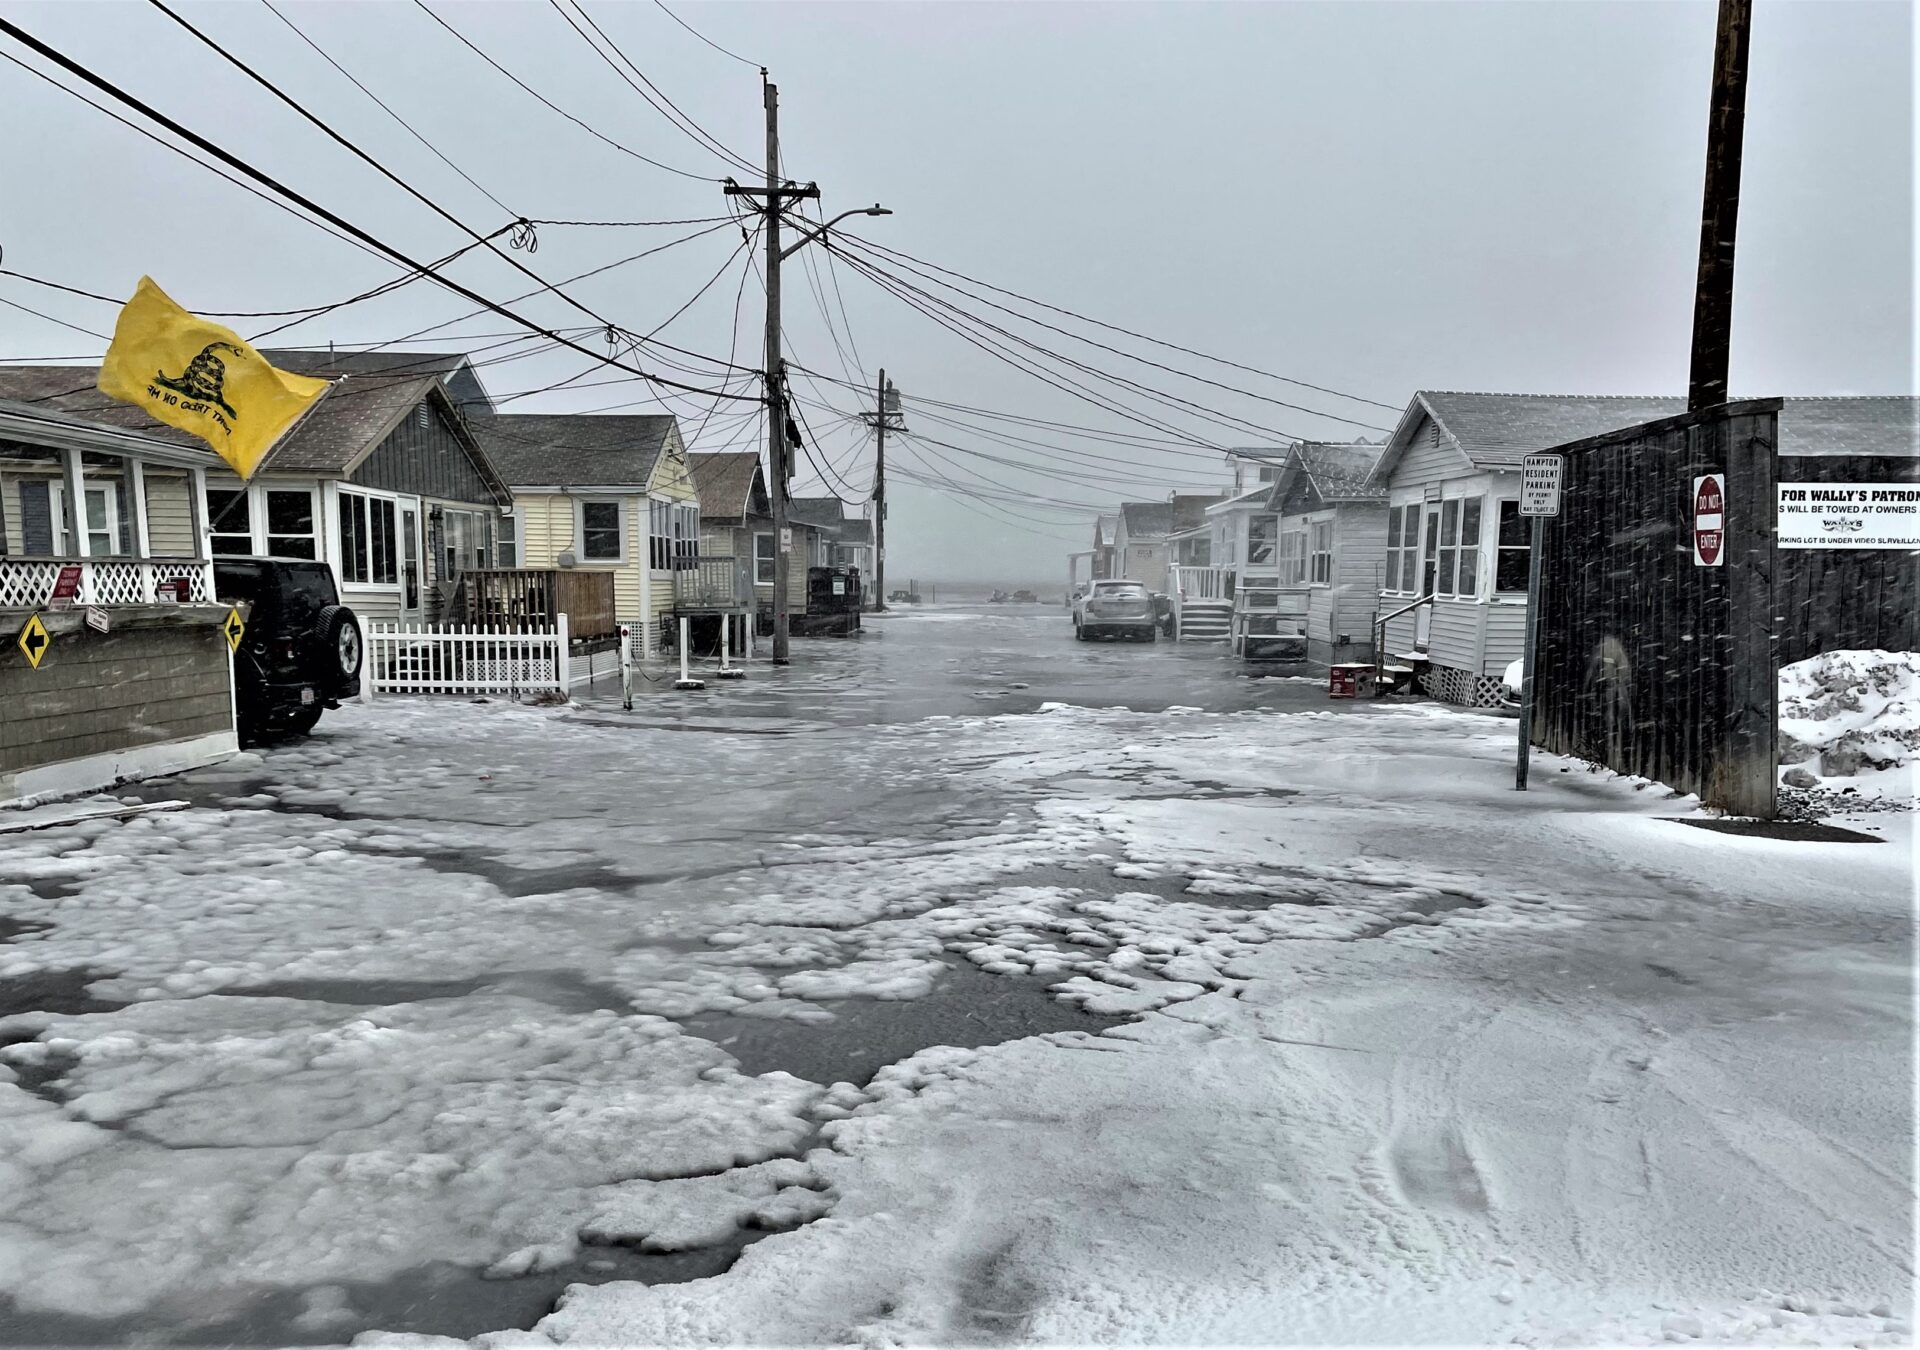 No Day At The Beach: Coastal Homes Are At Risk From Flooding